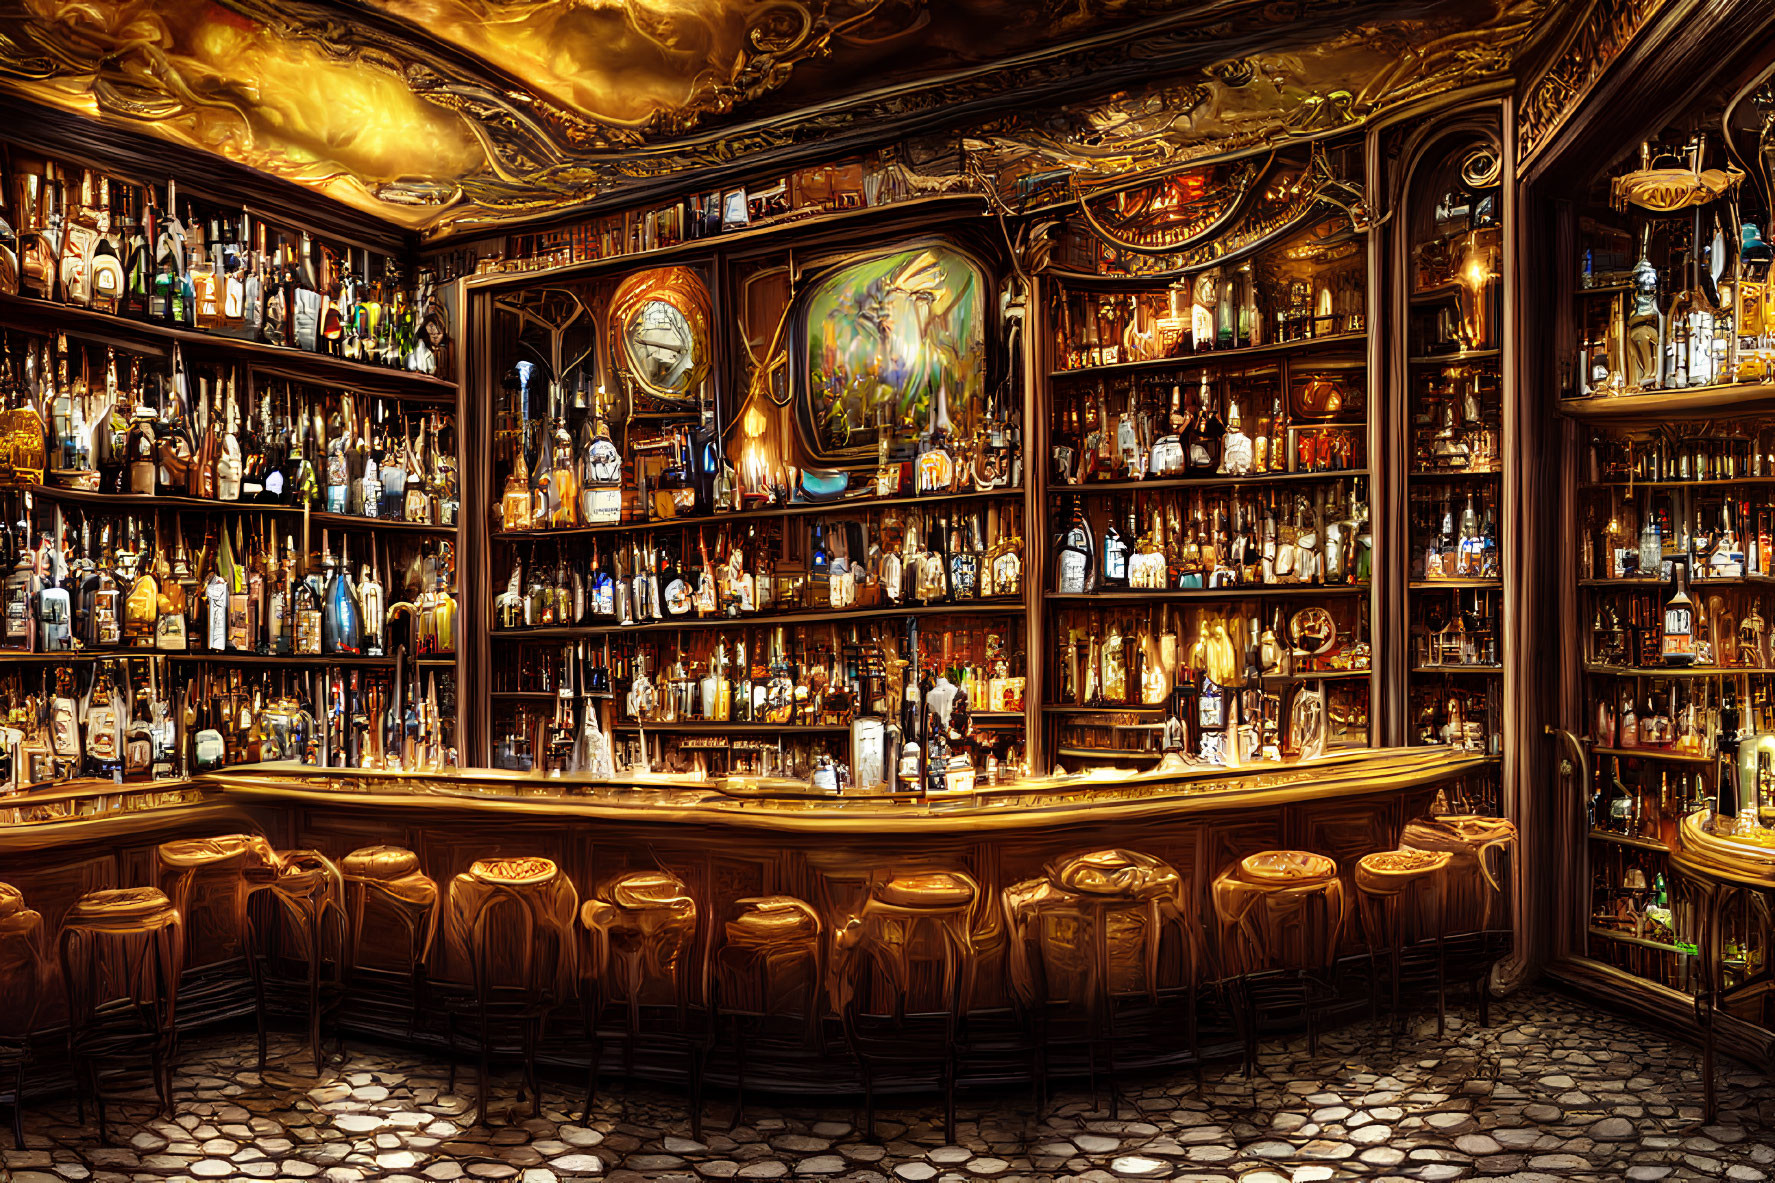 Luxurious Bar with Golden Ceilings, Ornate Decor, and Clock Centerpiece